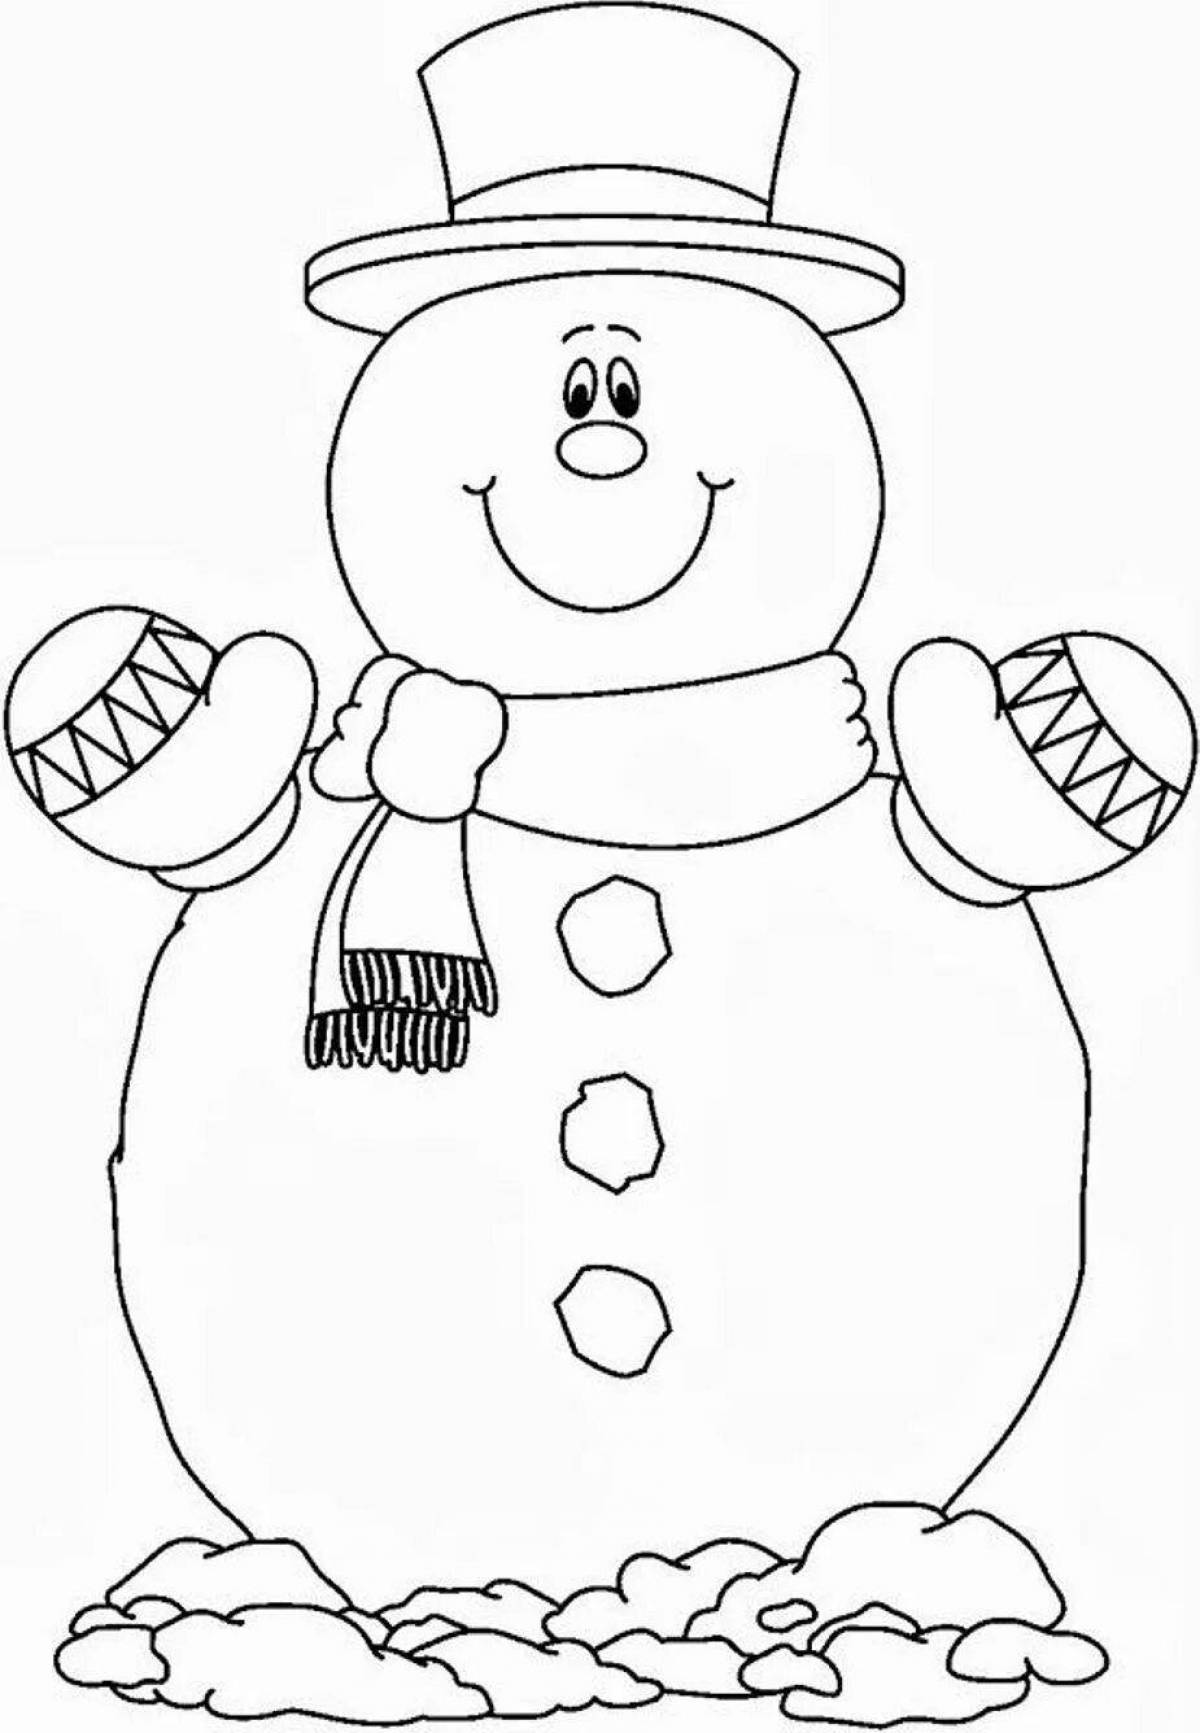 Coloring page snowman mask in bright colors